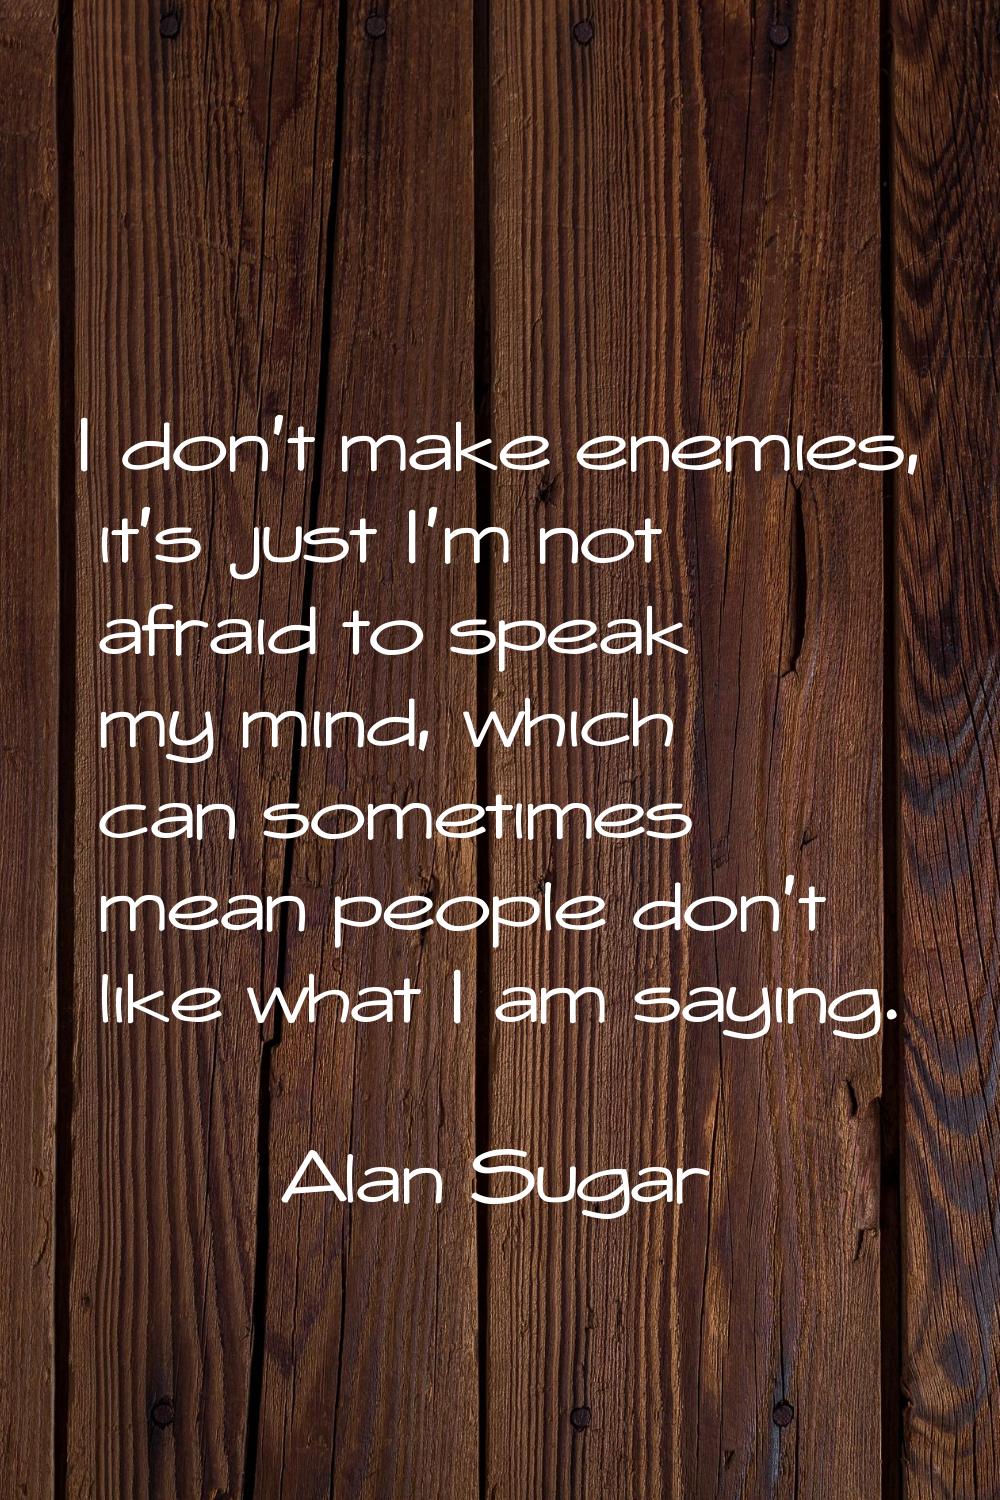 I don't make enemies, it's just I'm not afraid to speak my mind, which can sometimes mean people do